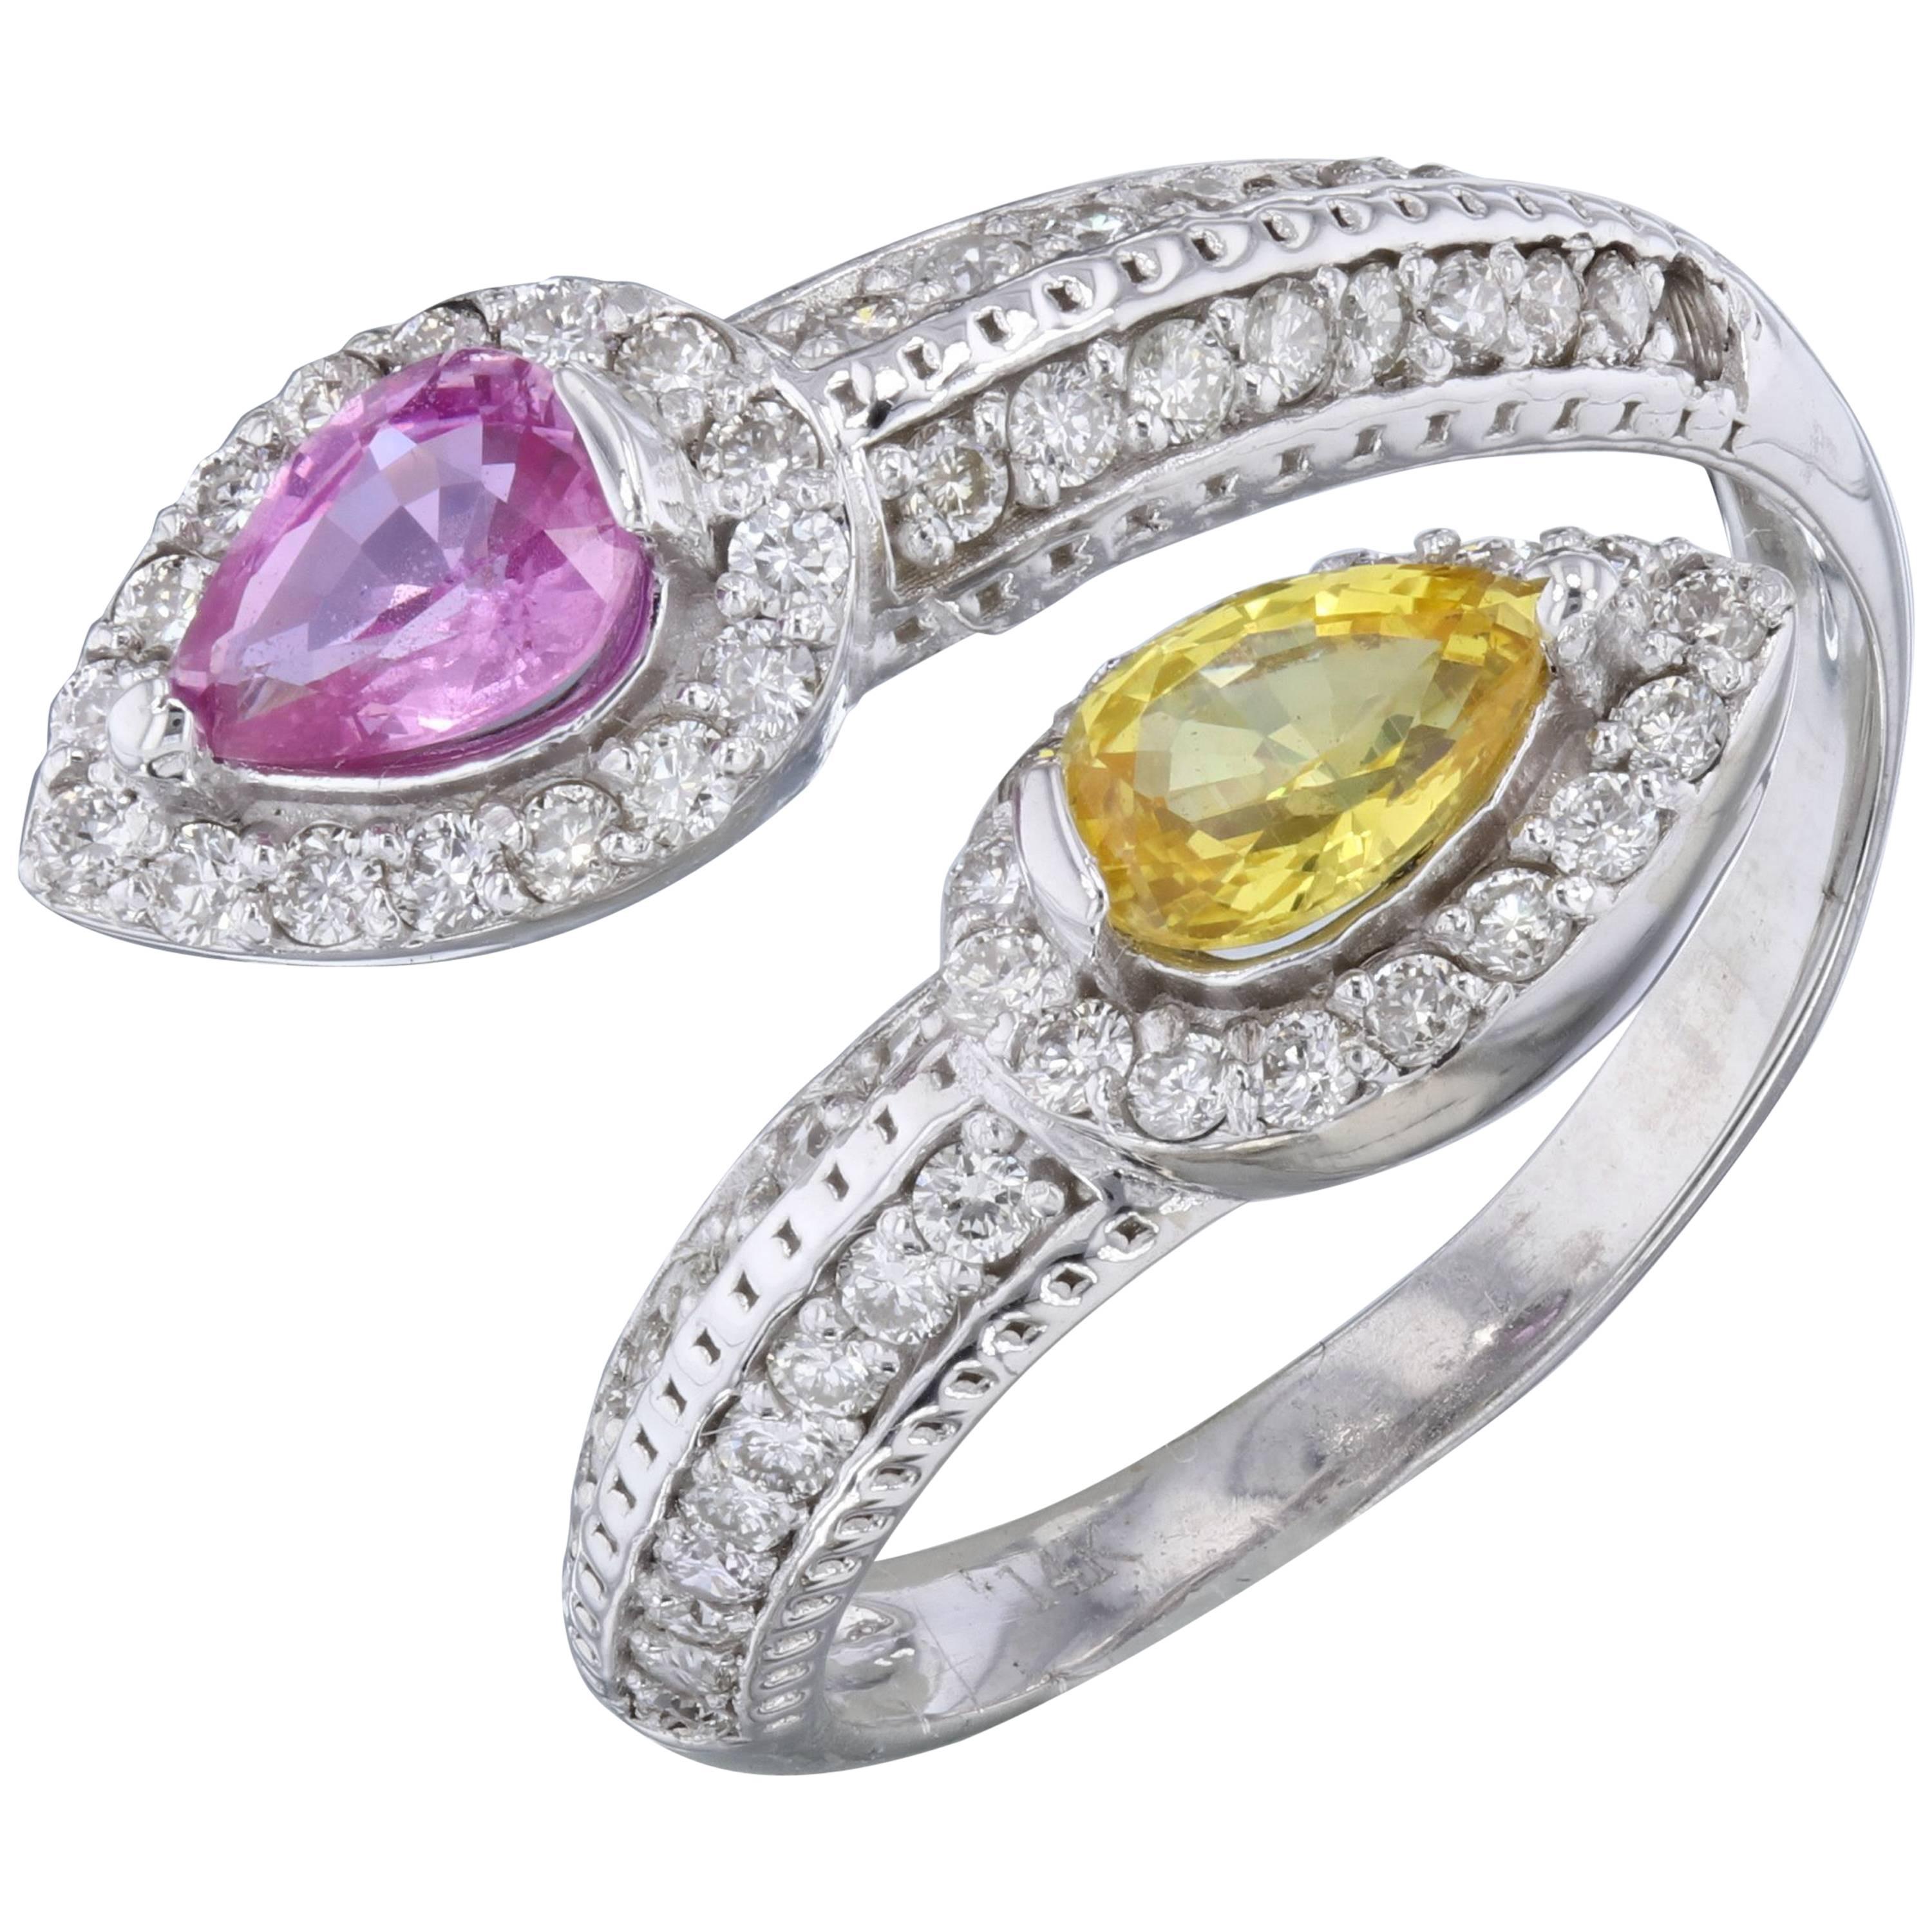 1.56 Carat Pink and Yellow Sapphire Diamond Cocktail Ring